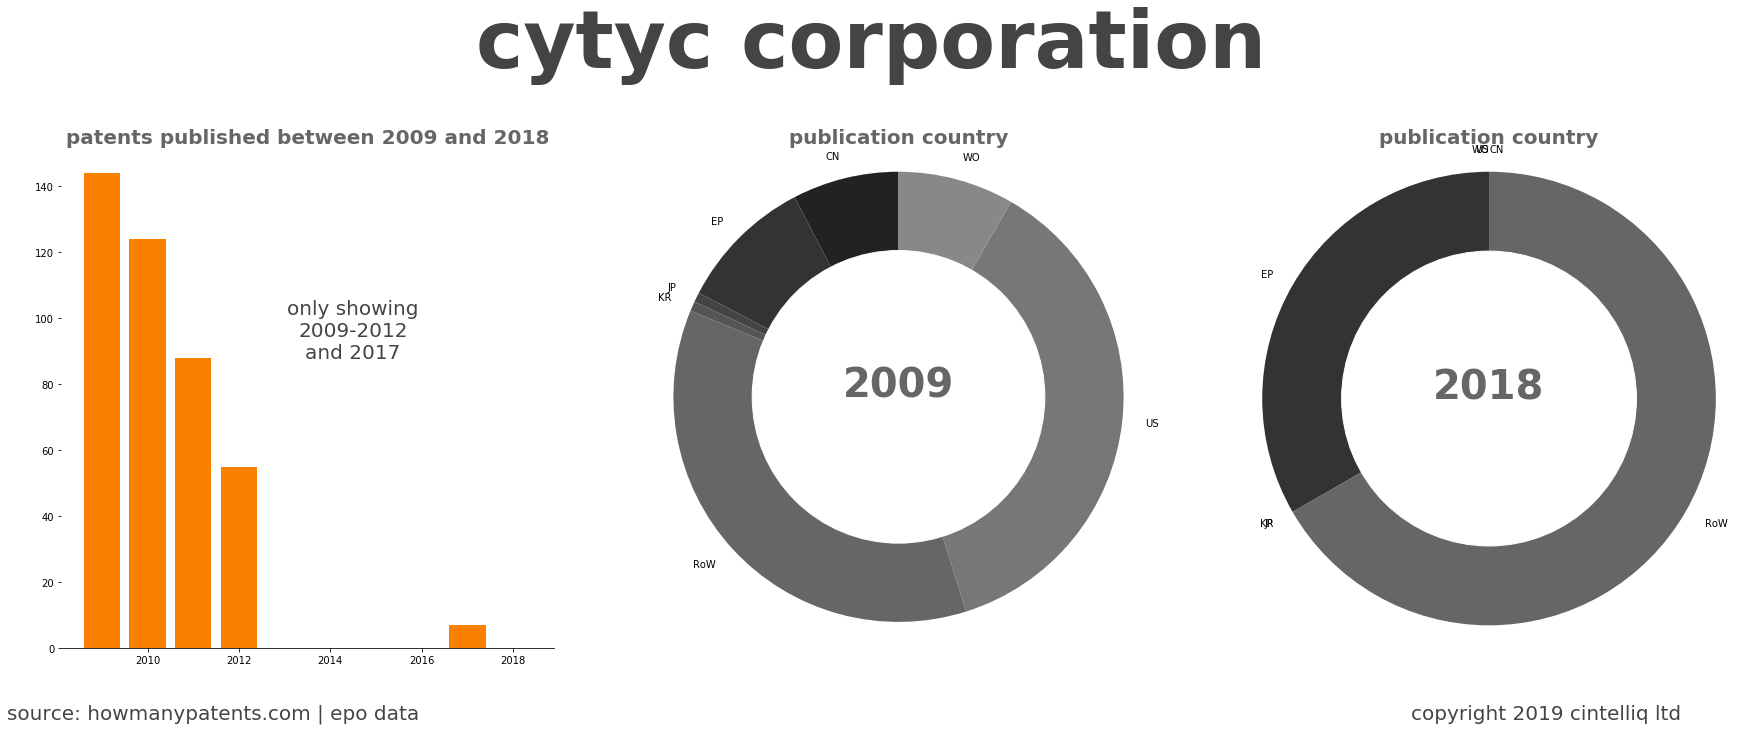 summary of patents for Cytyc Corporation